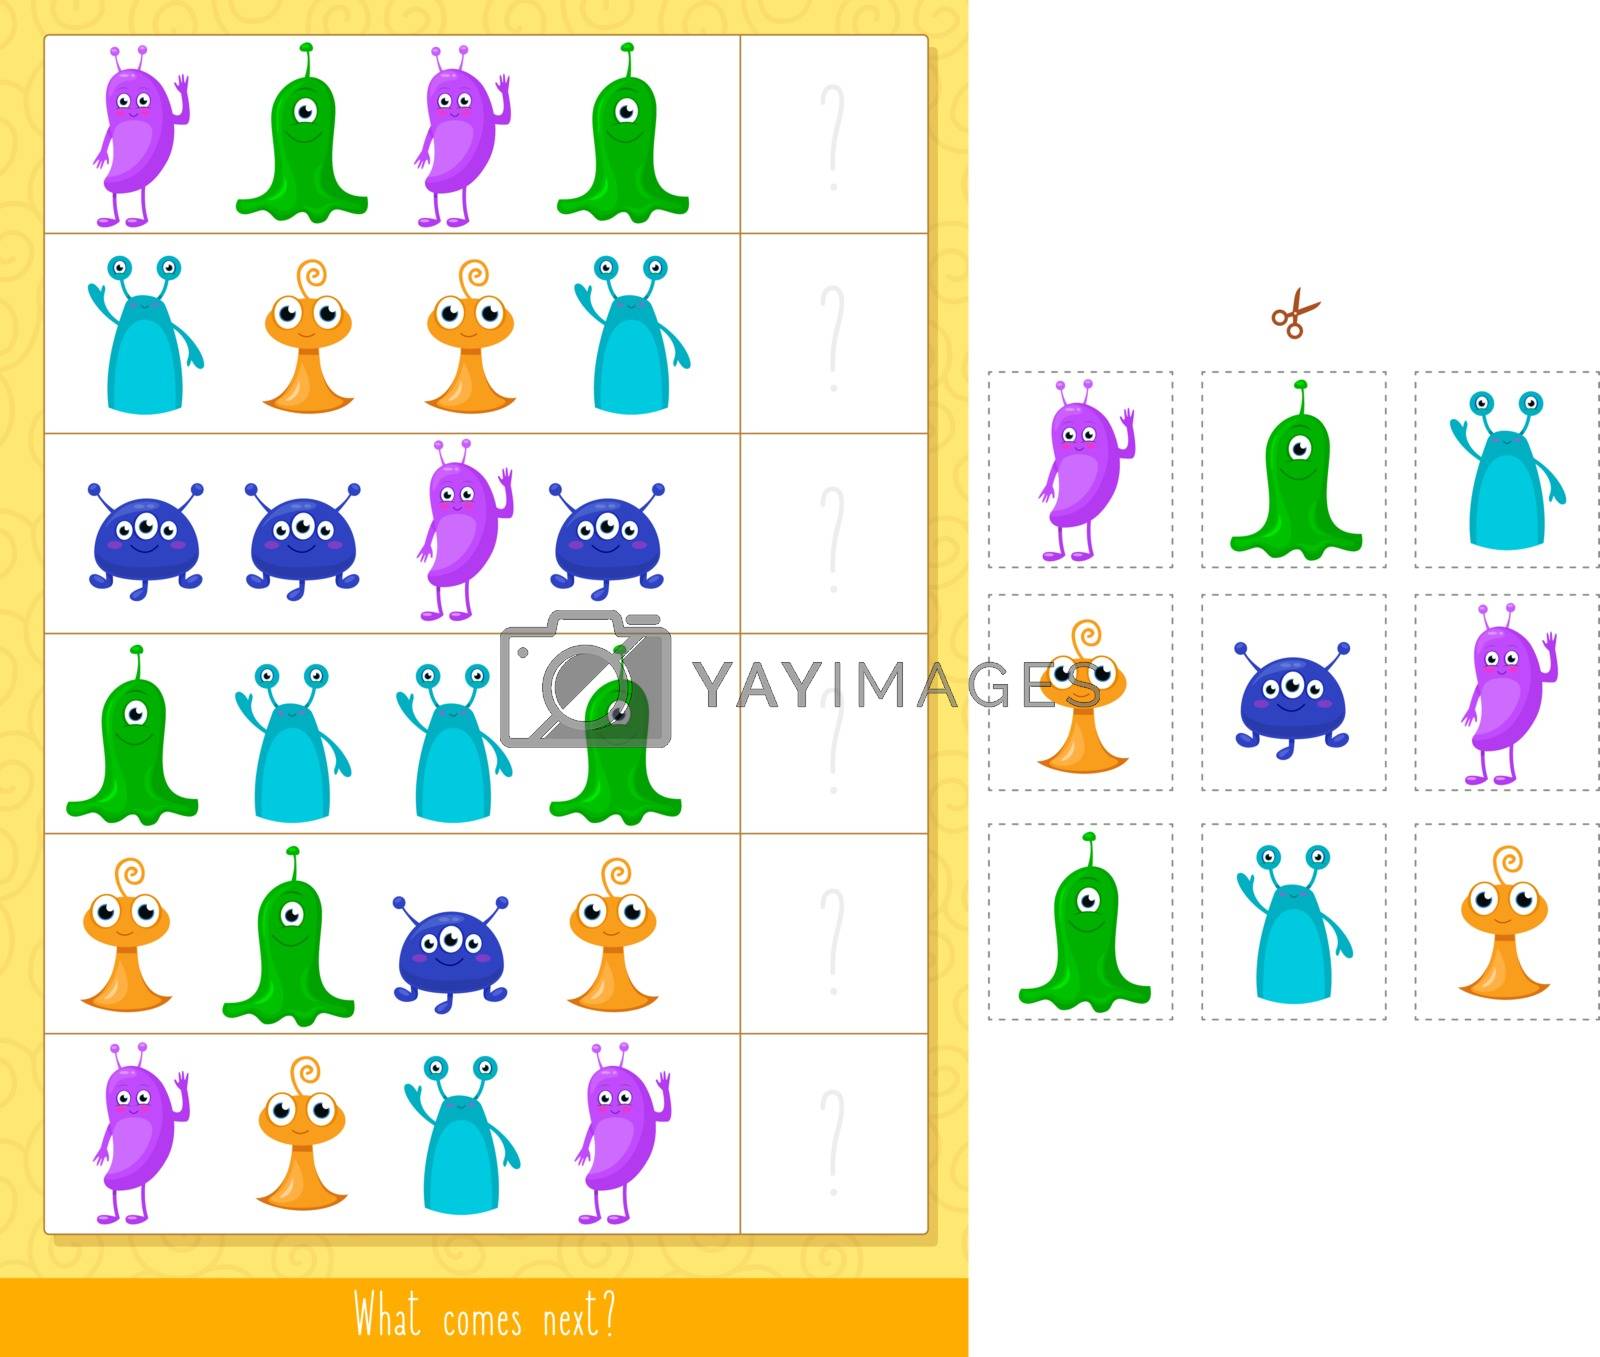 Toddlers activity, educational children game, vector illustration